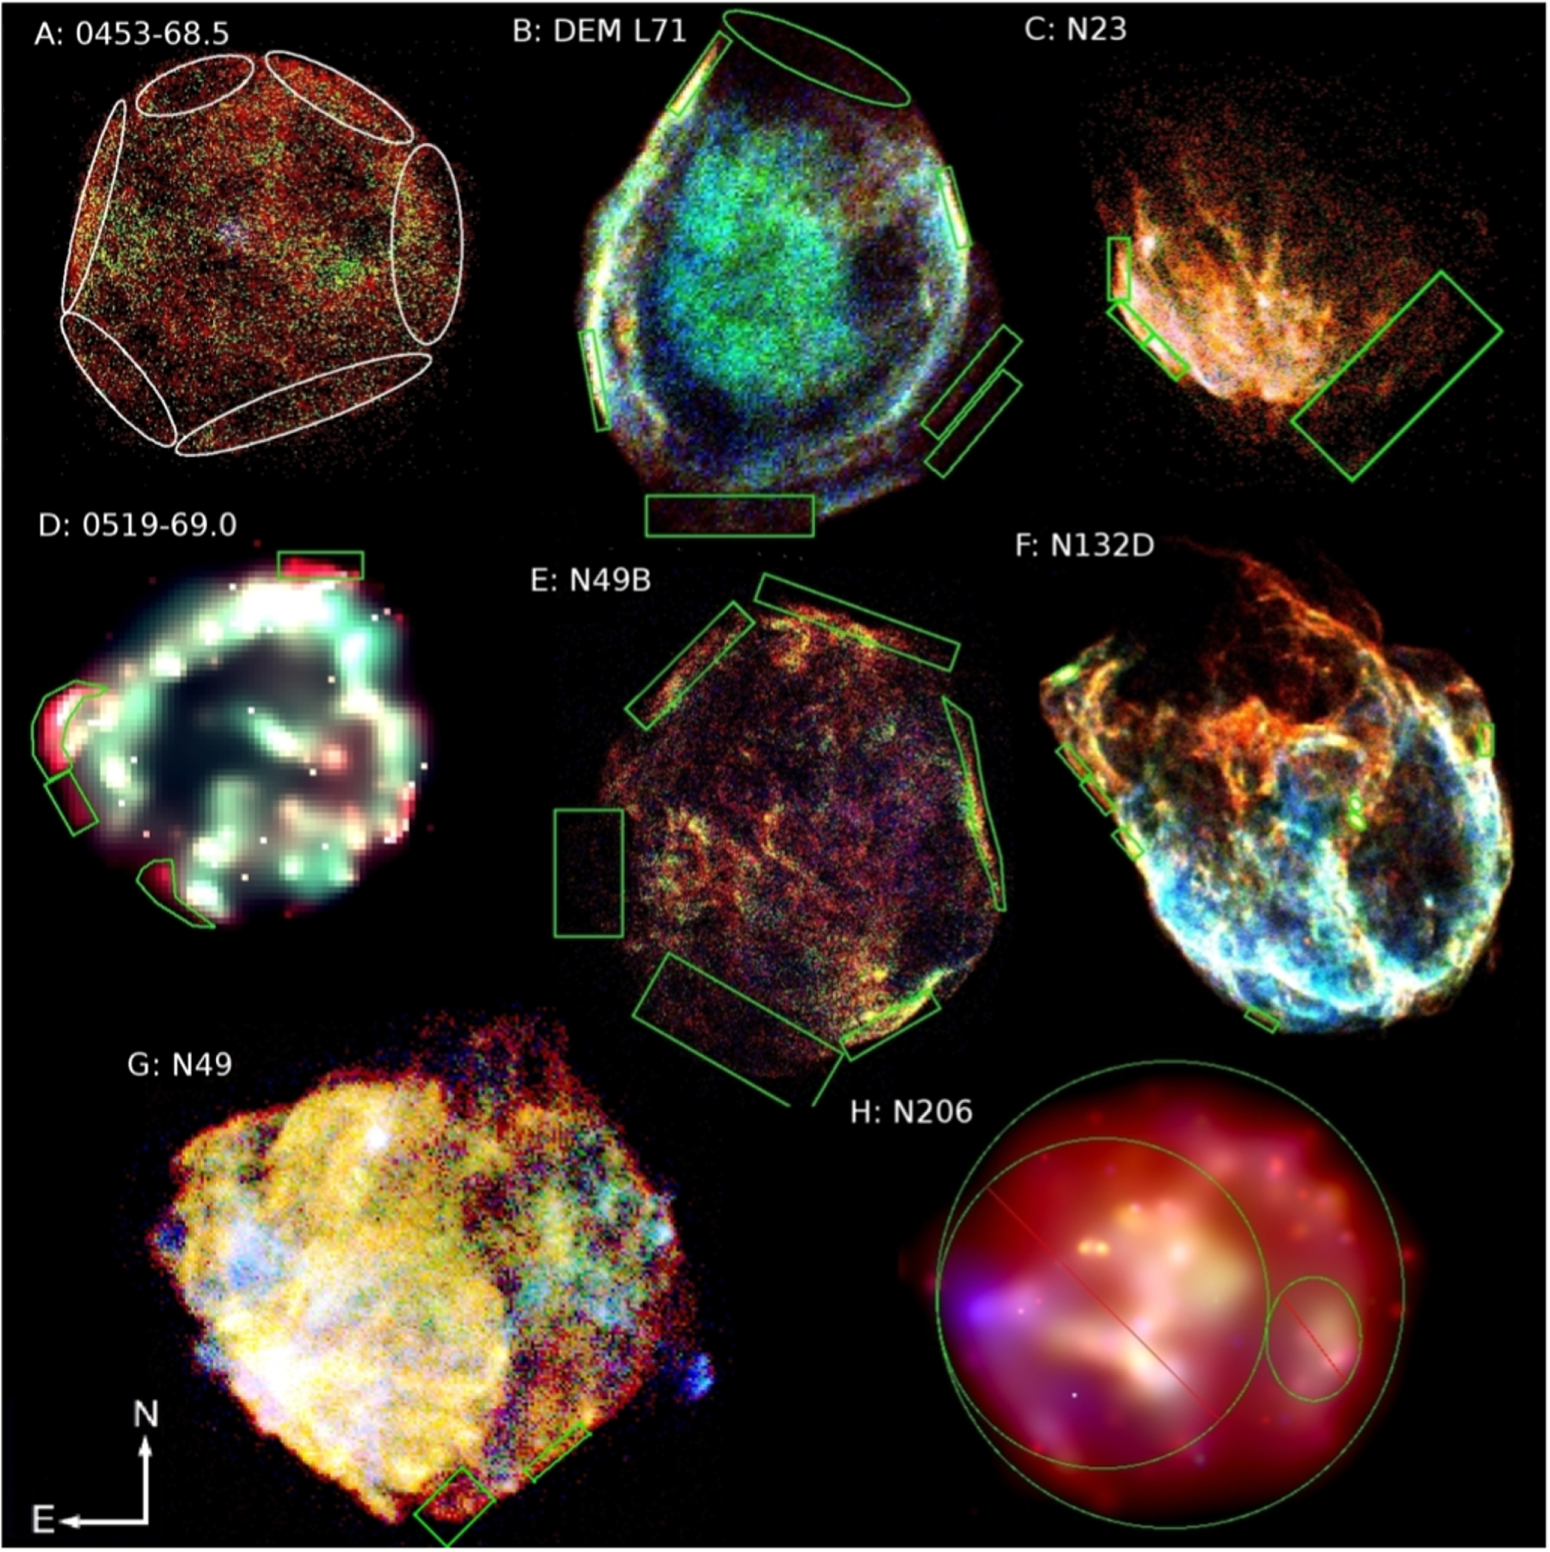 Featured Image: Supernova Remnants in the LMC